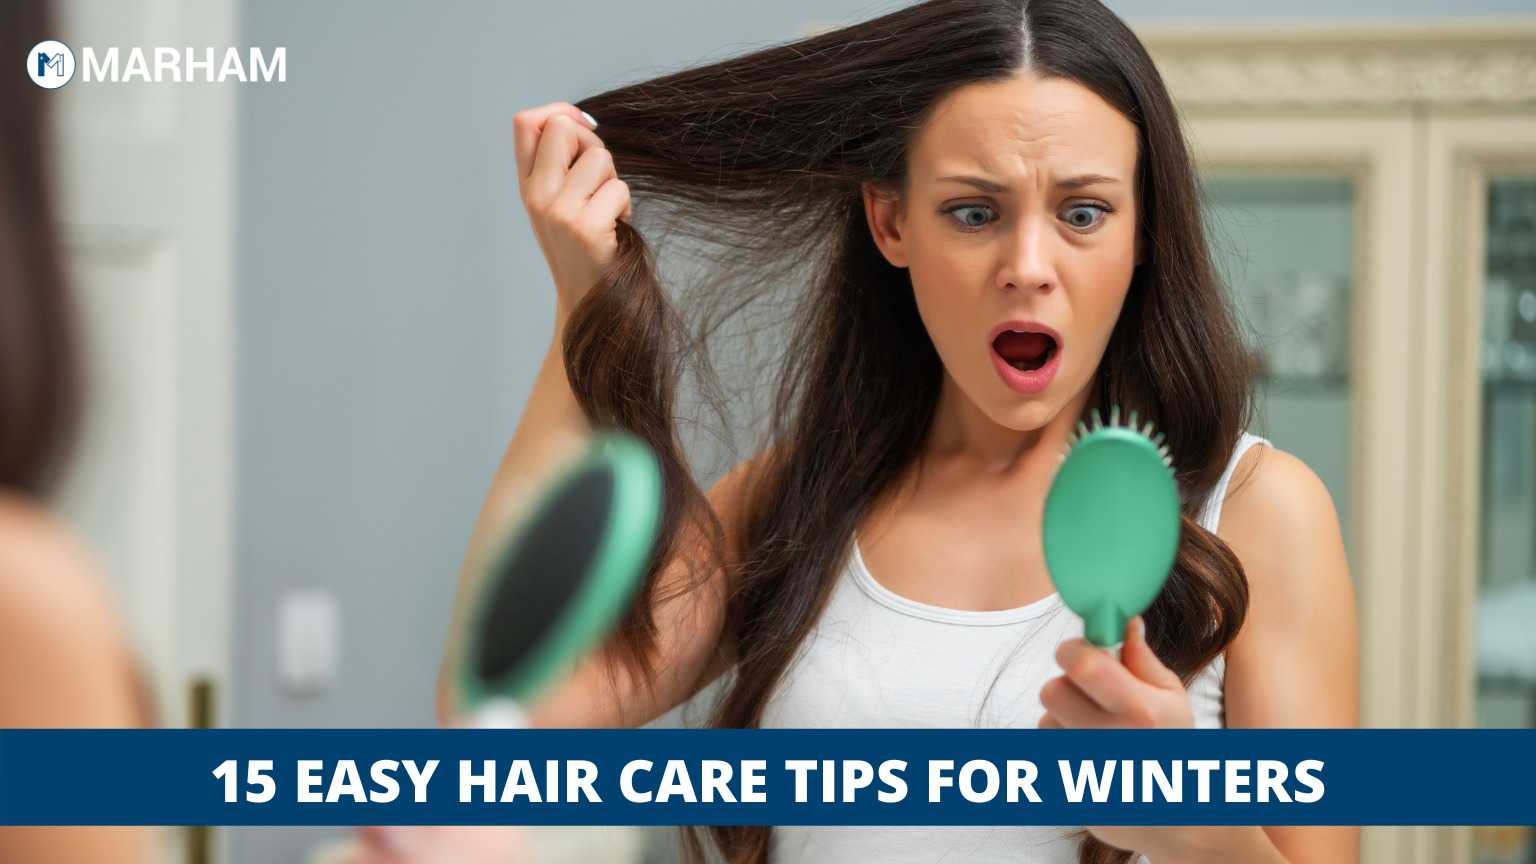 How to Take Care of Hair in Winter Naturally? | Marham